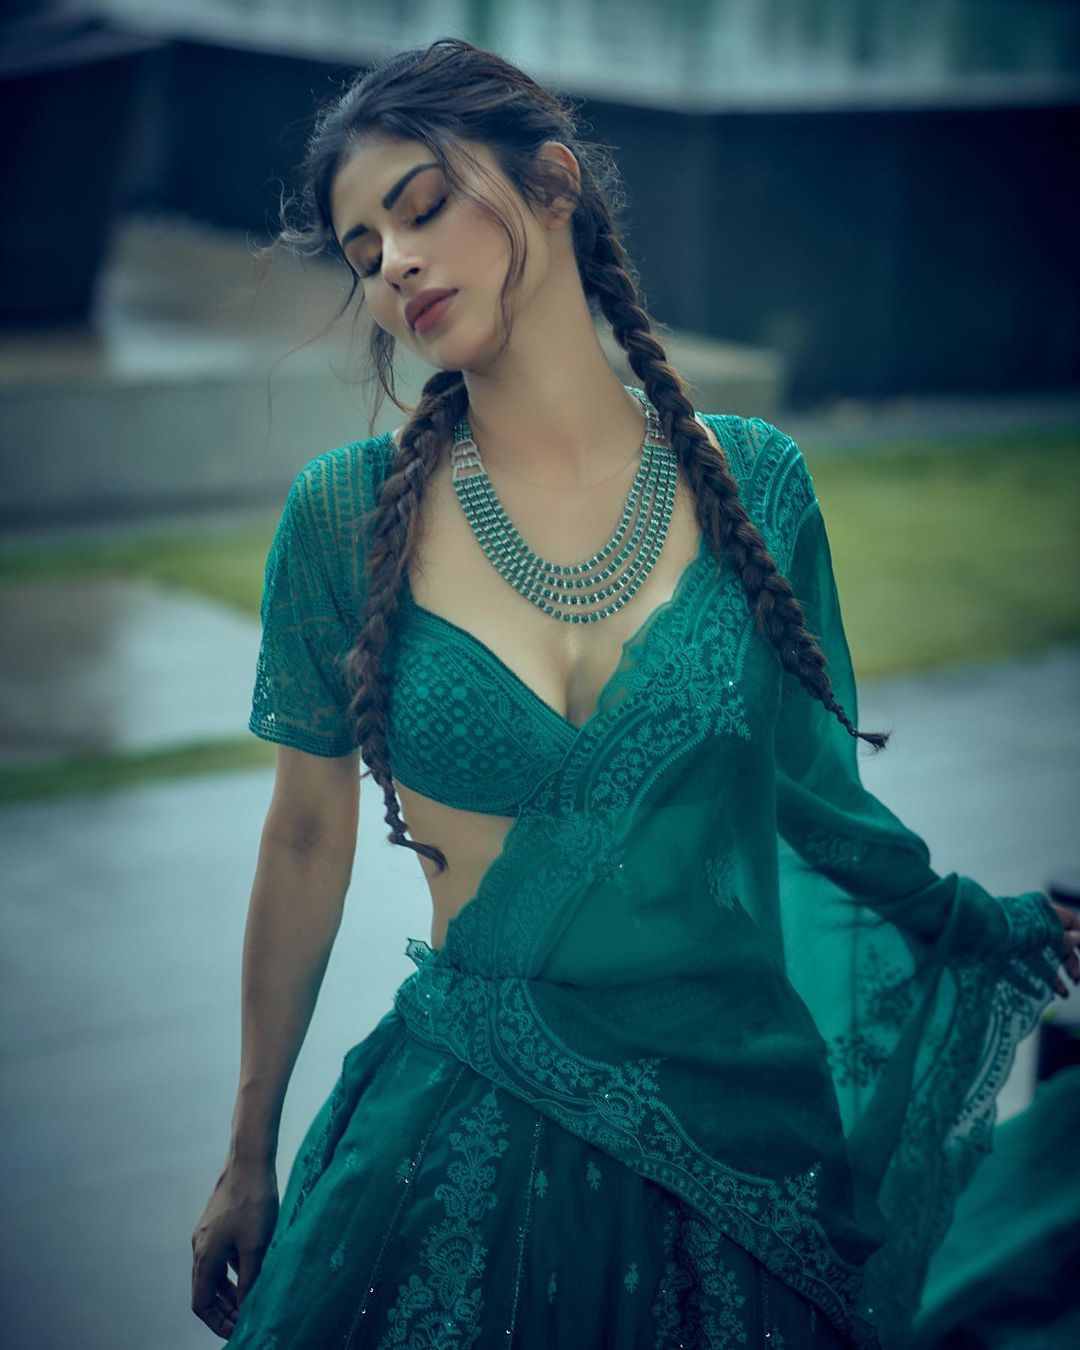 Mouni roy photos in different single gown